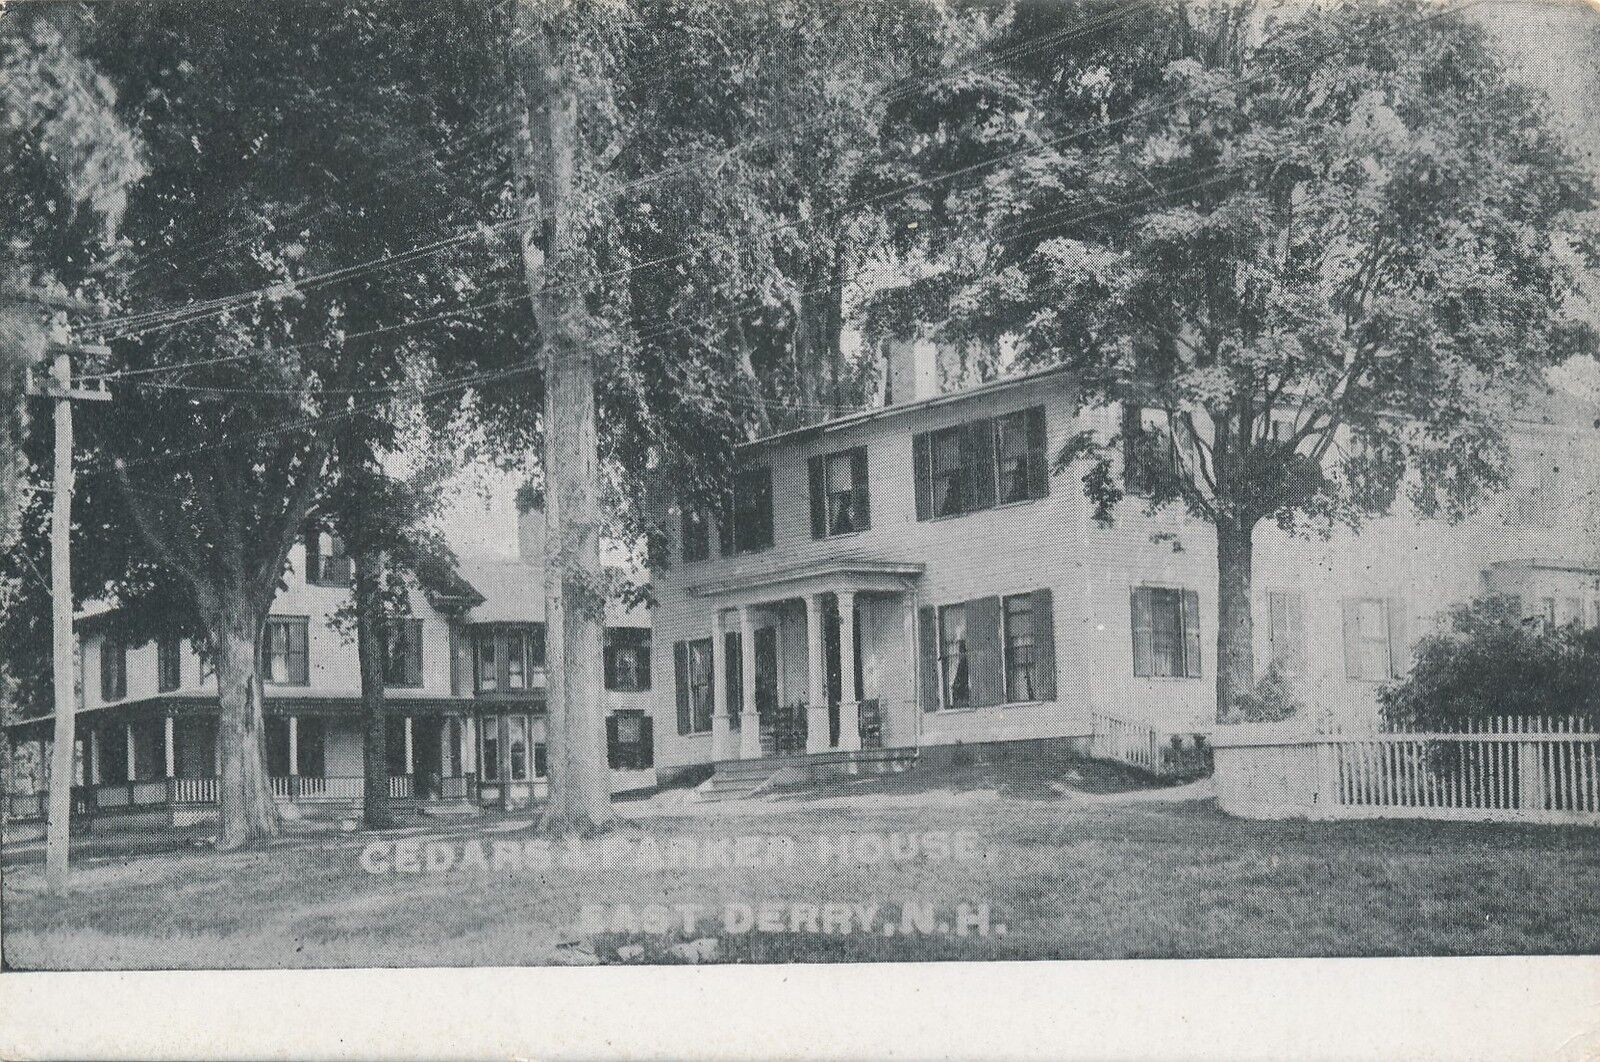 EAST DERRY NH – Cedars and Parker House